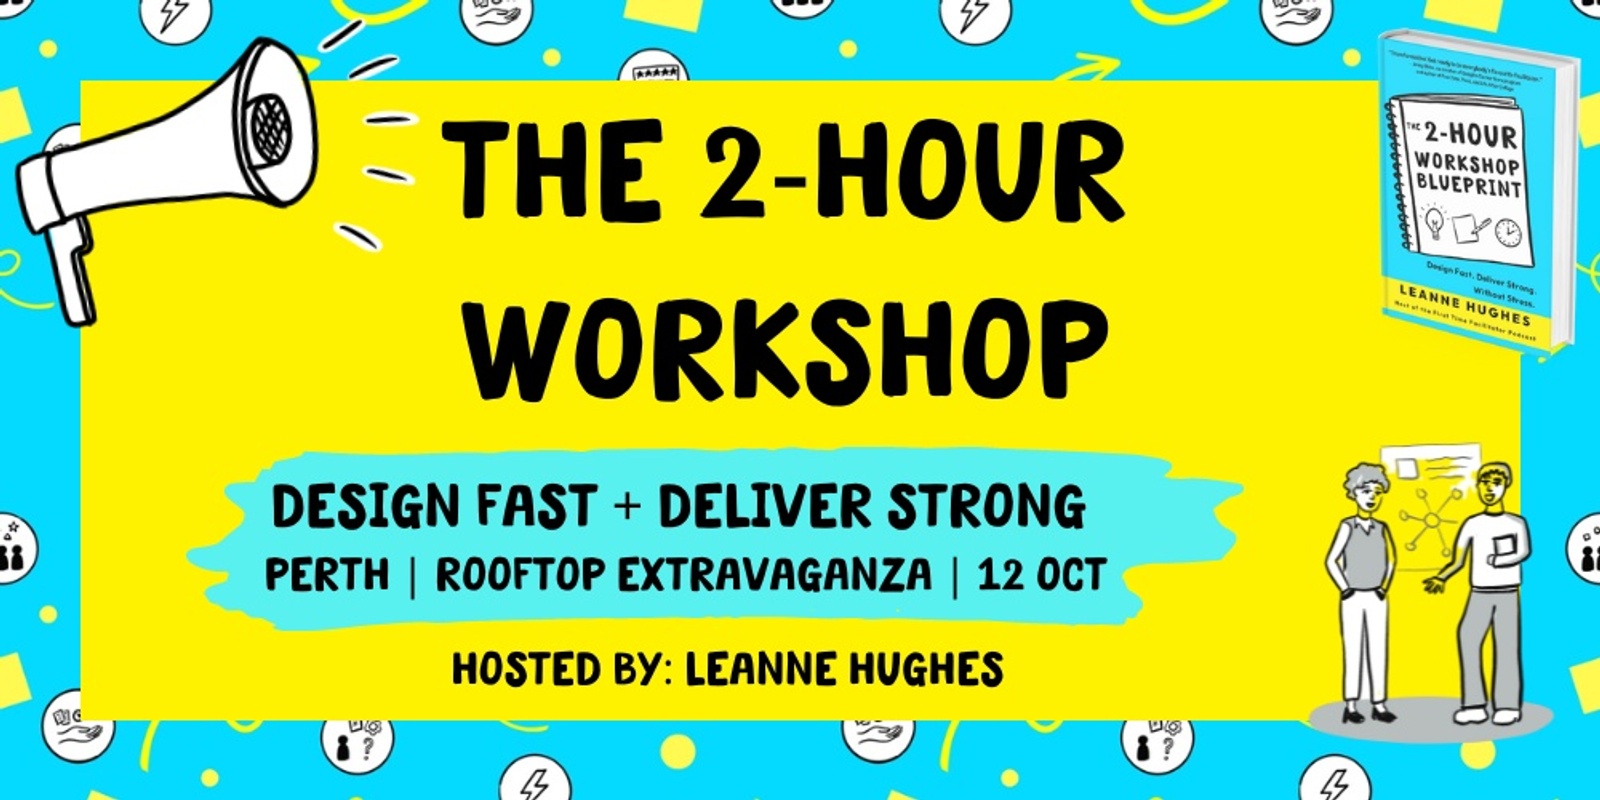 Banner image for The 2-Hour Workshop Blueprint: Perth Rooftop Extravaganza